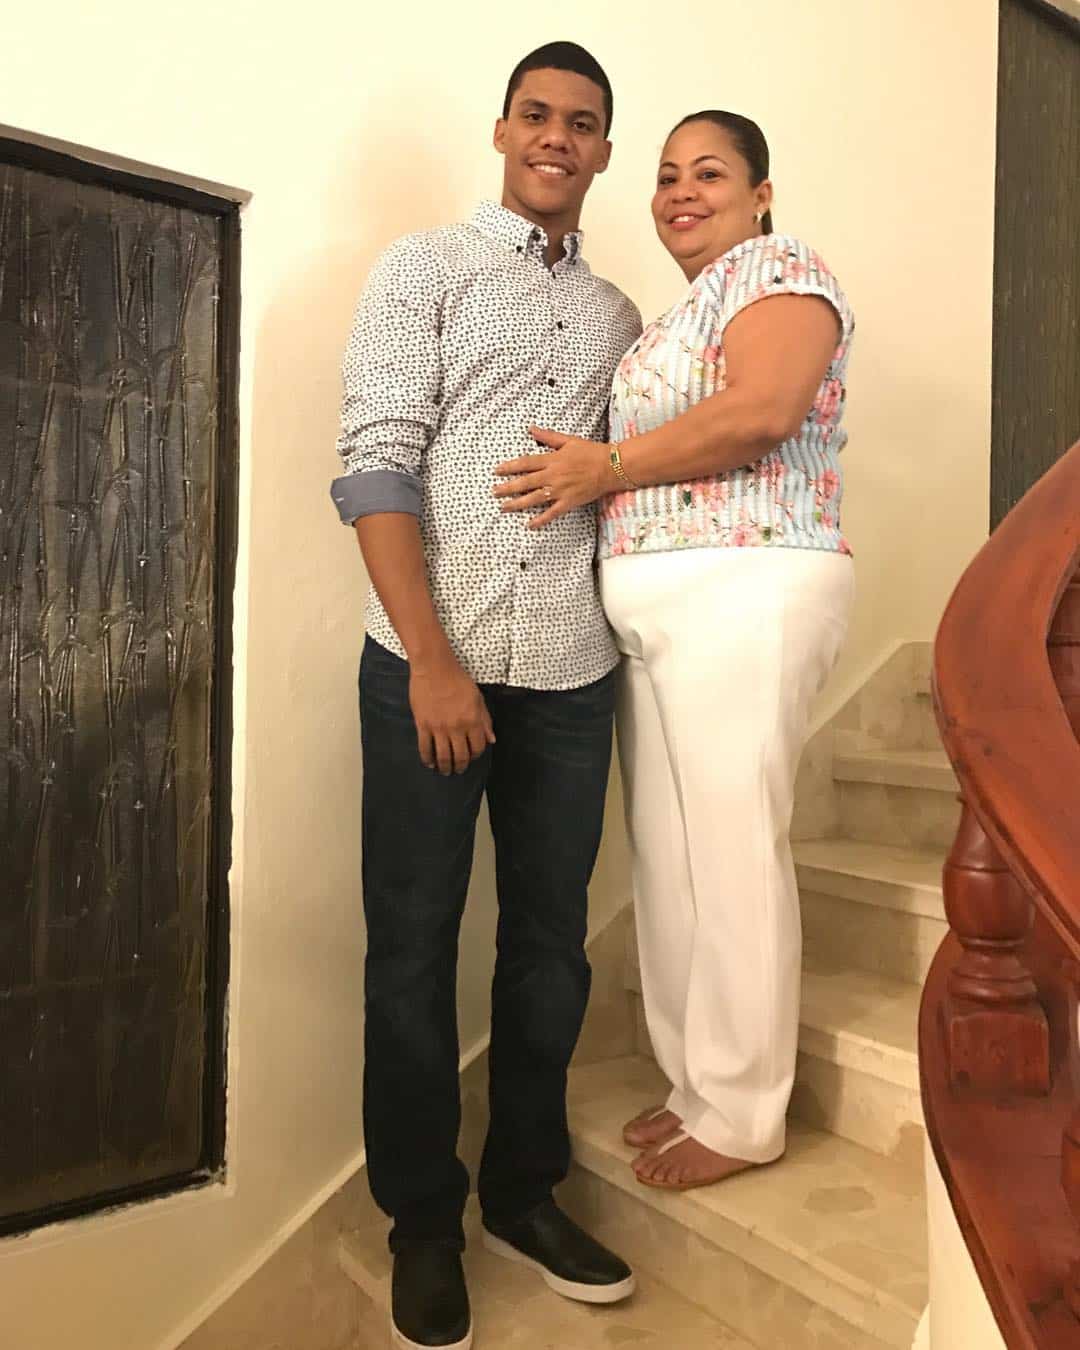 Juan Soto with his mother